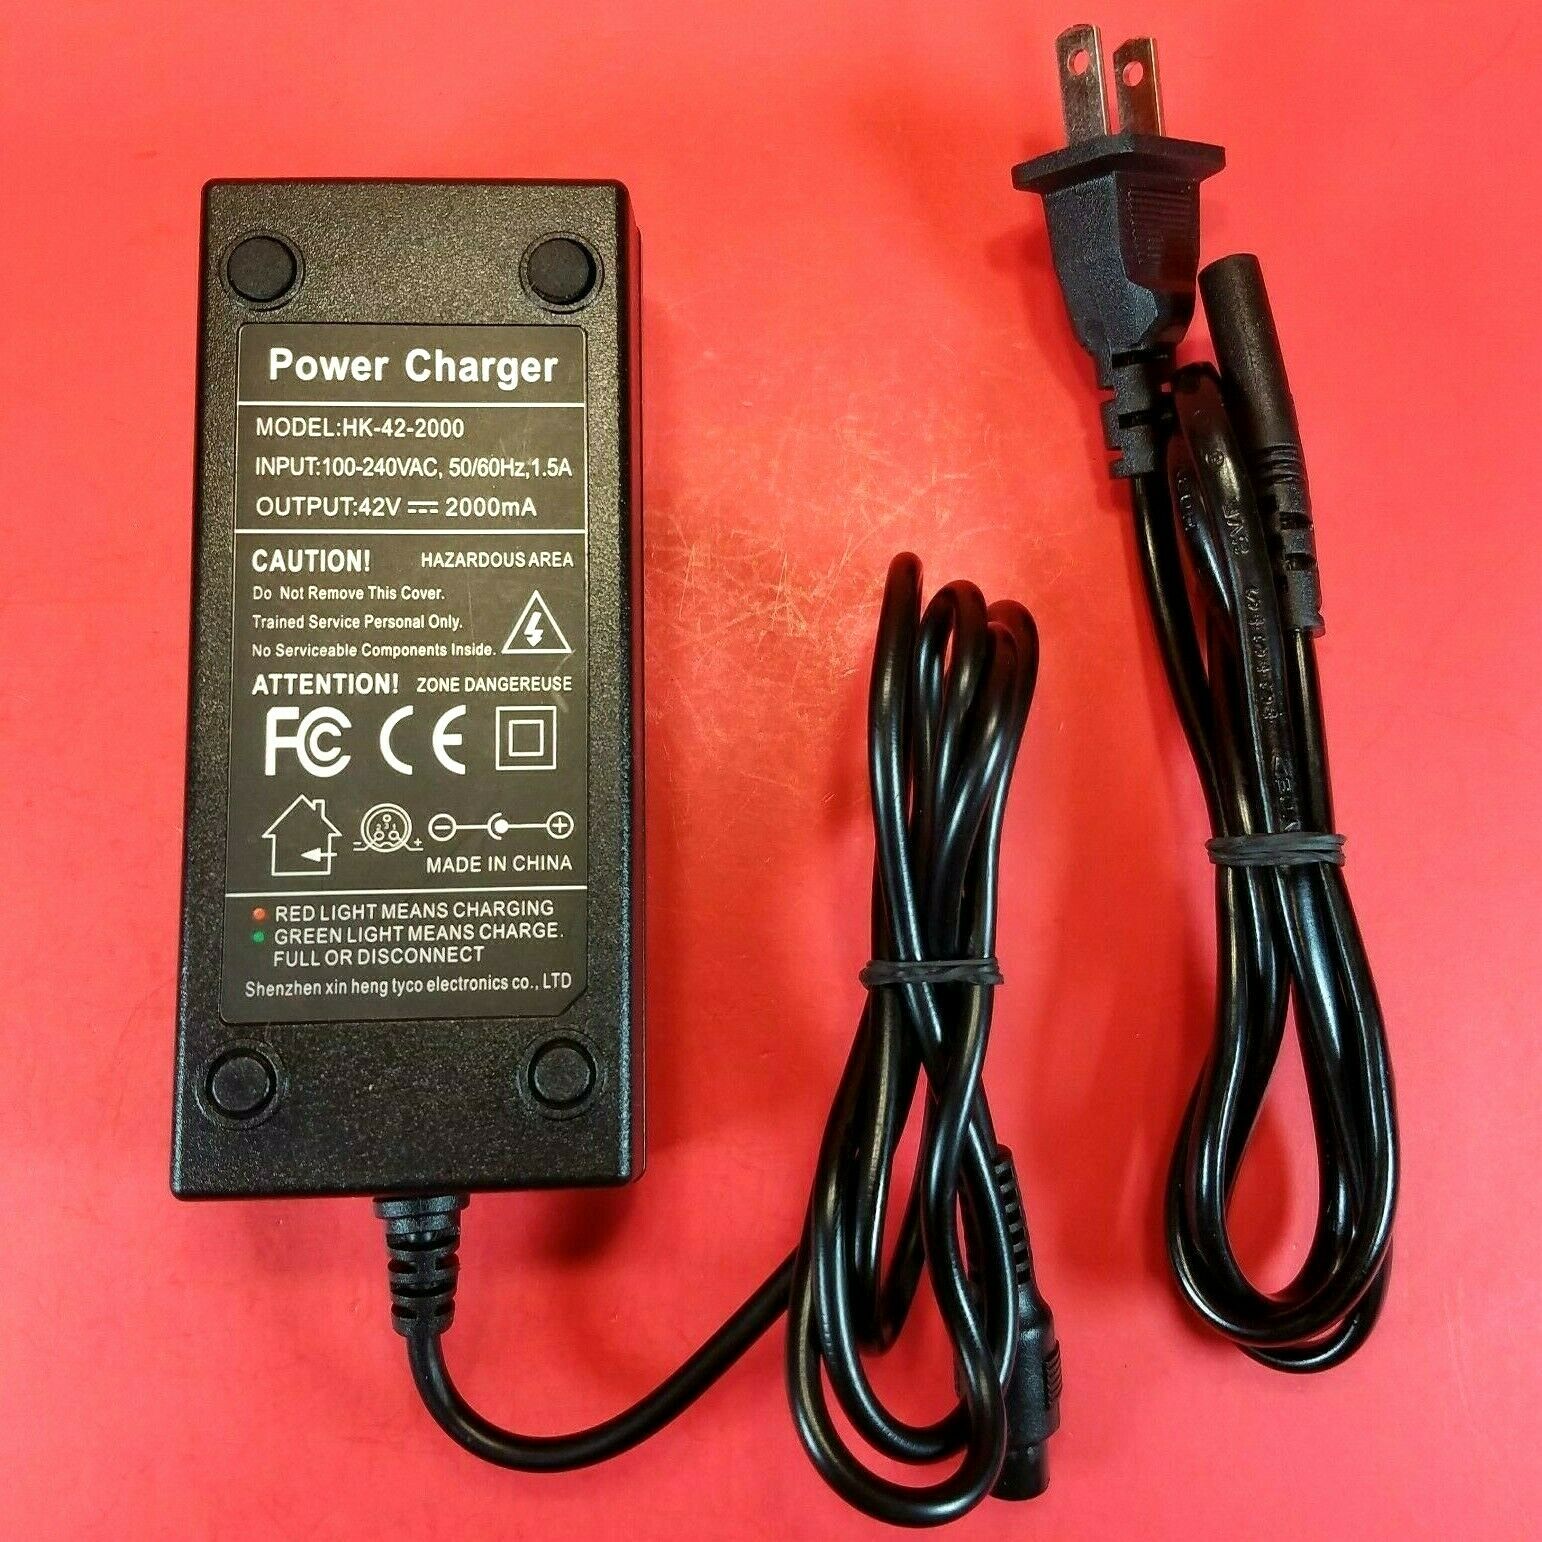 Power Charger HK-42-2000 Power Supply Adaptor 42 Volt - 2000mA OEM AC/DC Adapter Type: AC Adapter Output Voltage: 42 V